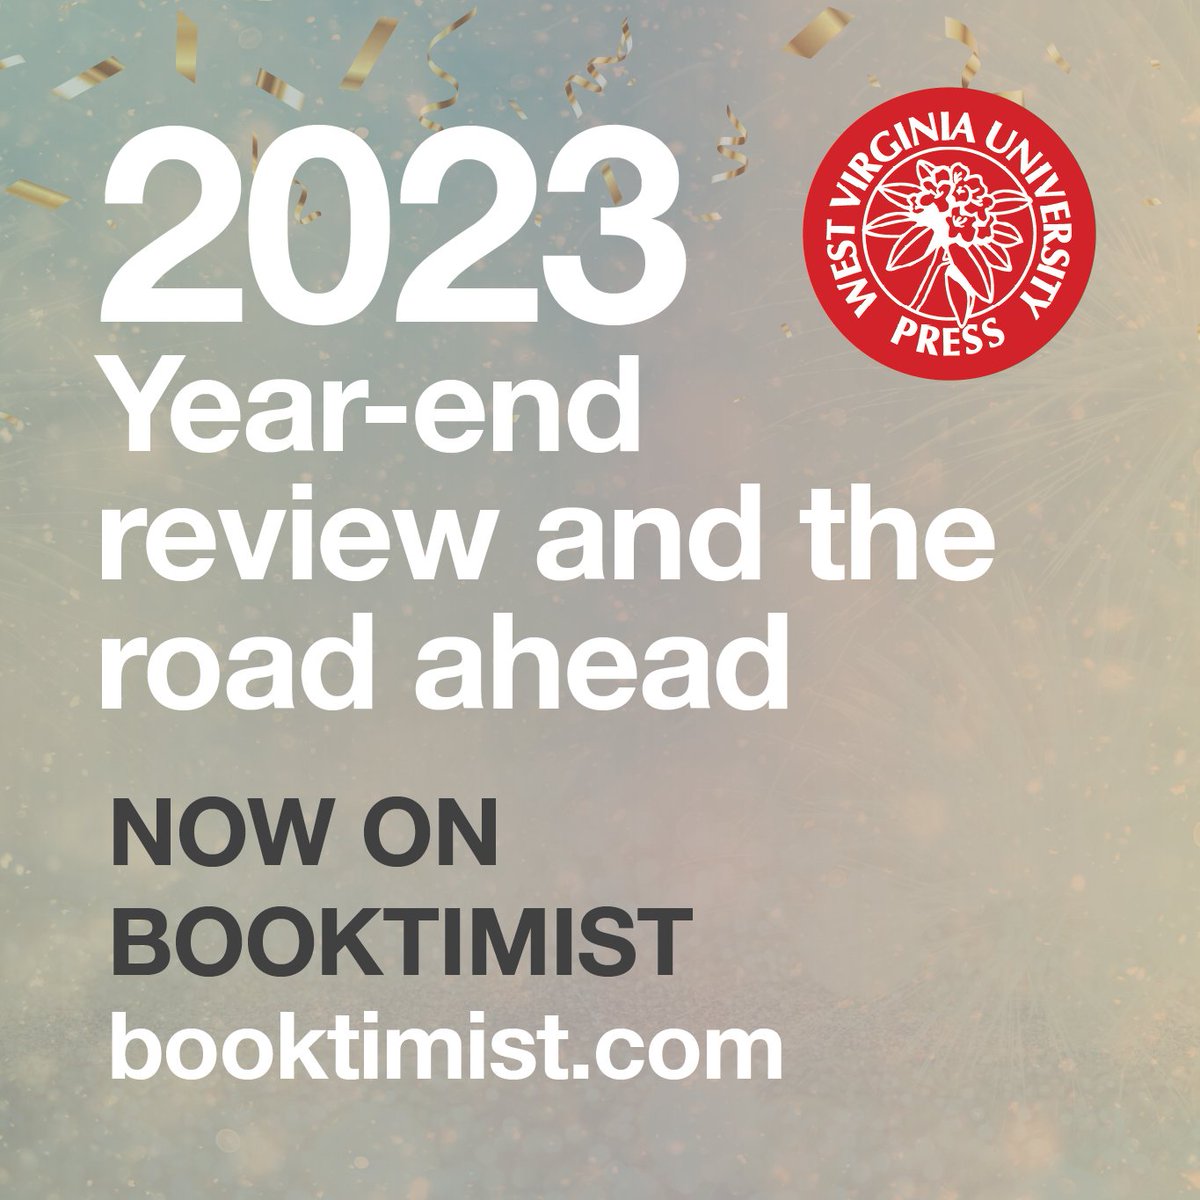 2023 year-end review and the road ahead, now on the Booktimist blog. booktimist.com